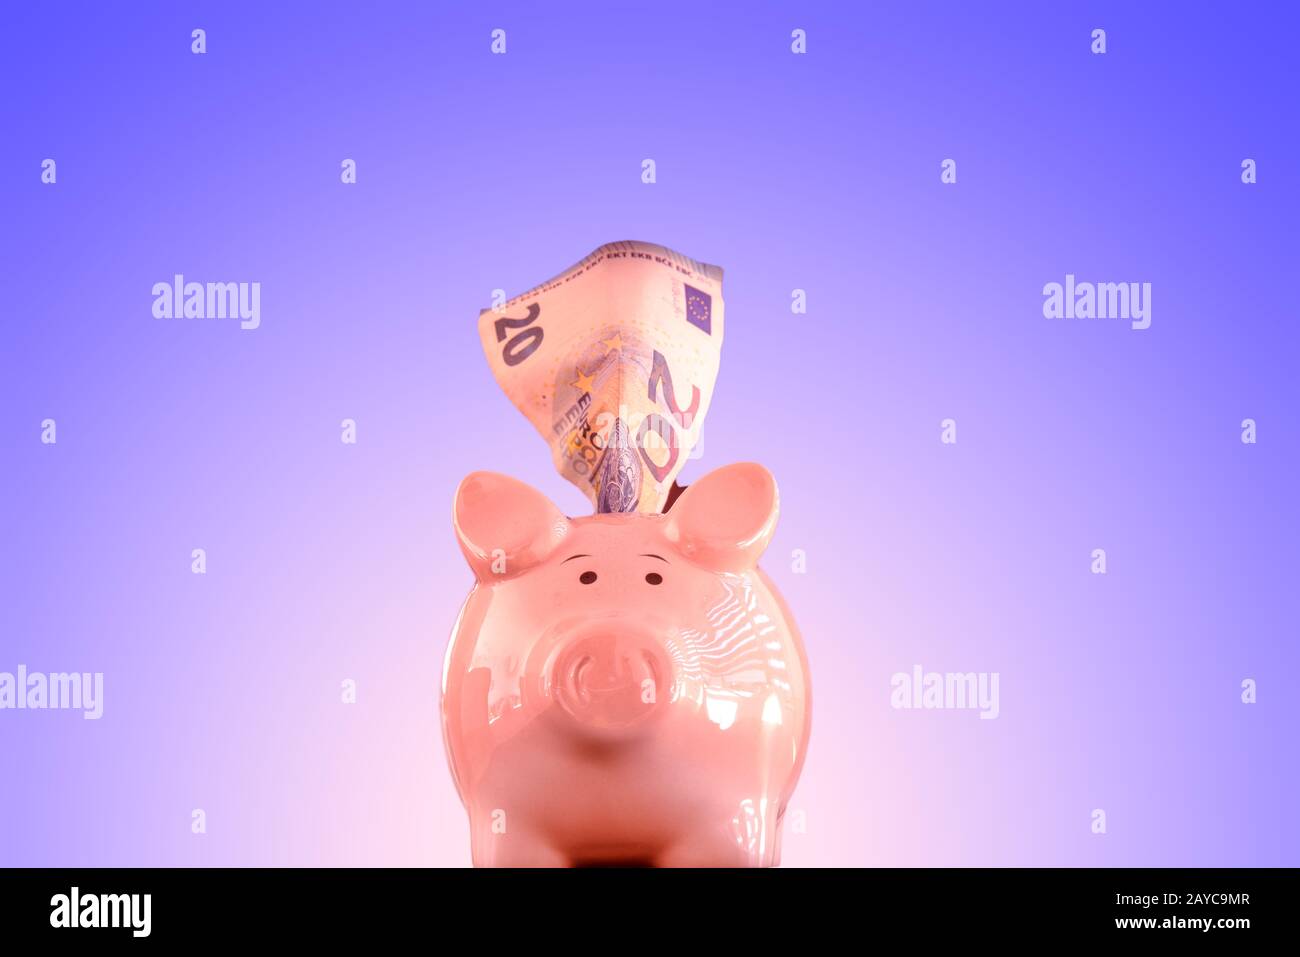 Piggy bank from the front on isolated blueish background Stock Photo